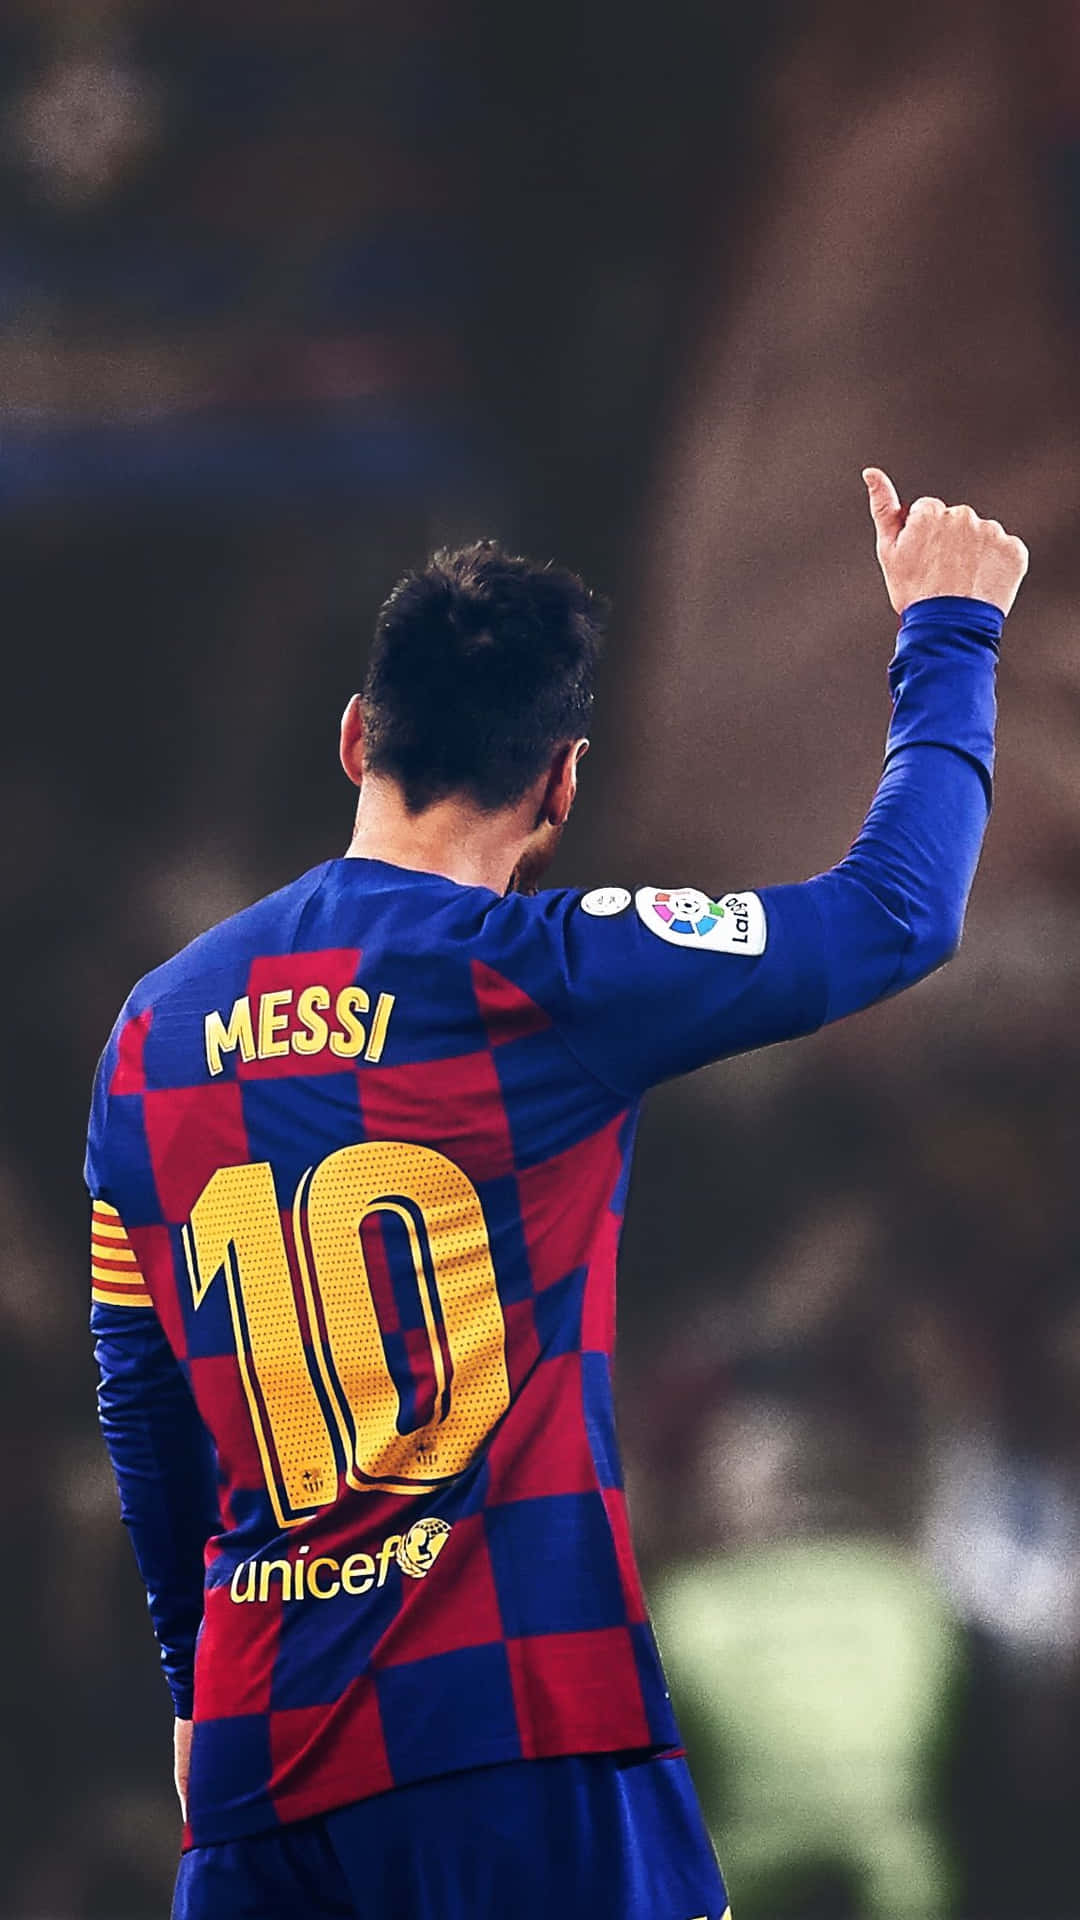 Image 'lionel Messi, King Of Football'